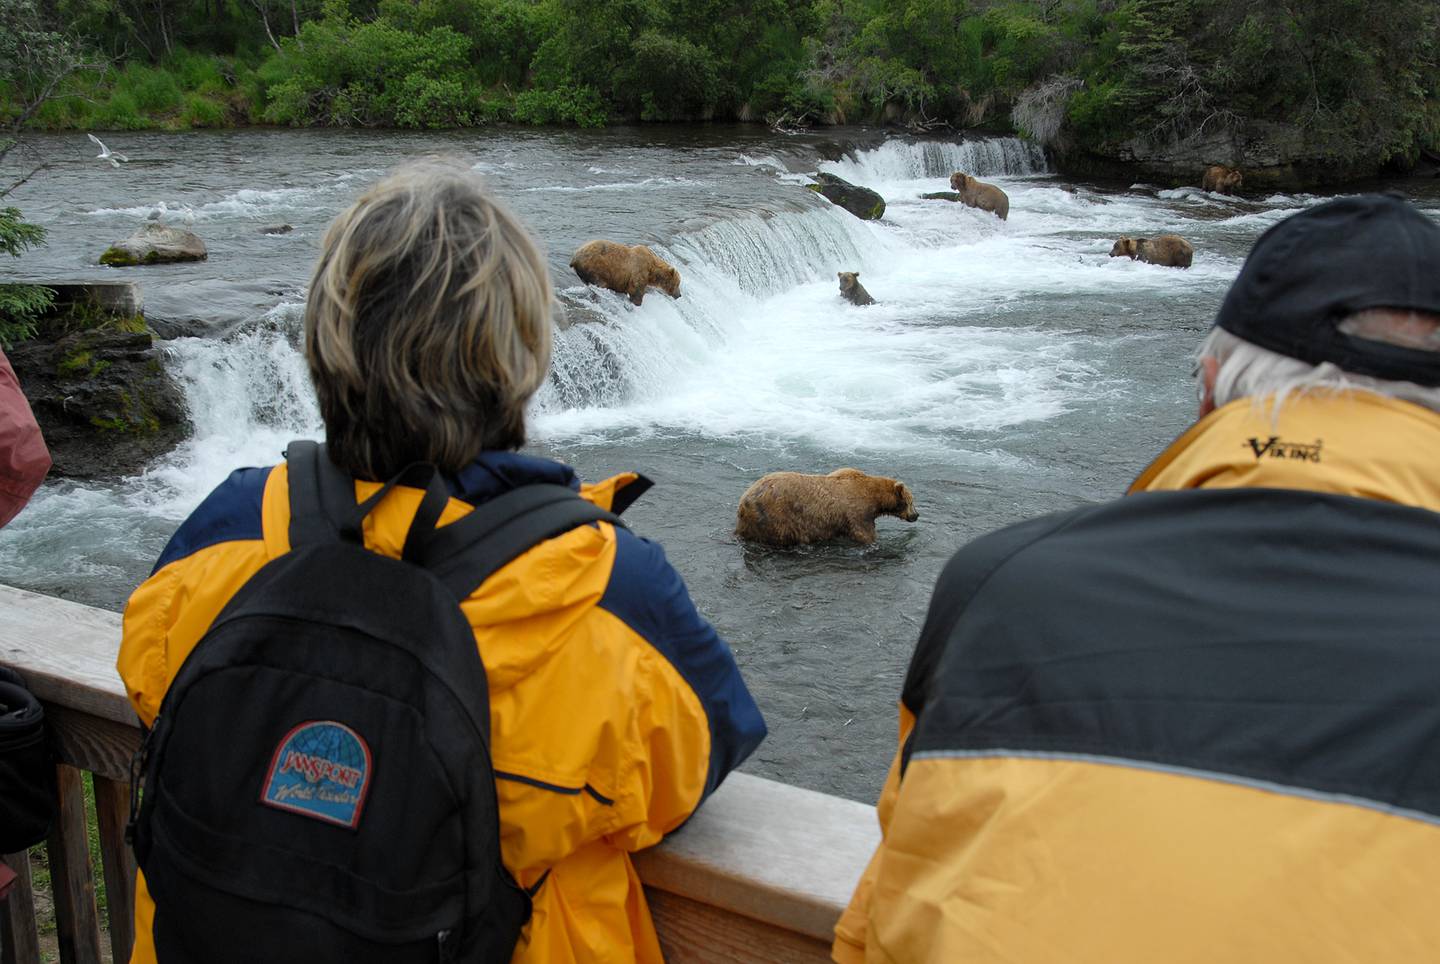 Everyone loves to watch the Brooks River bears, but there are plenty of other prime viewing spots in Alaska